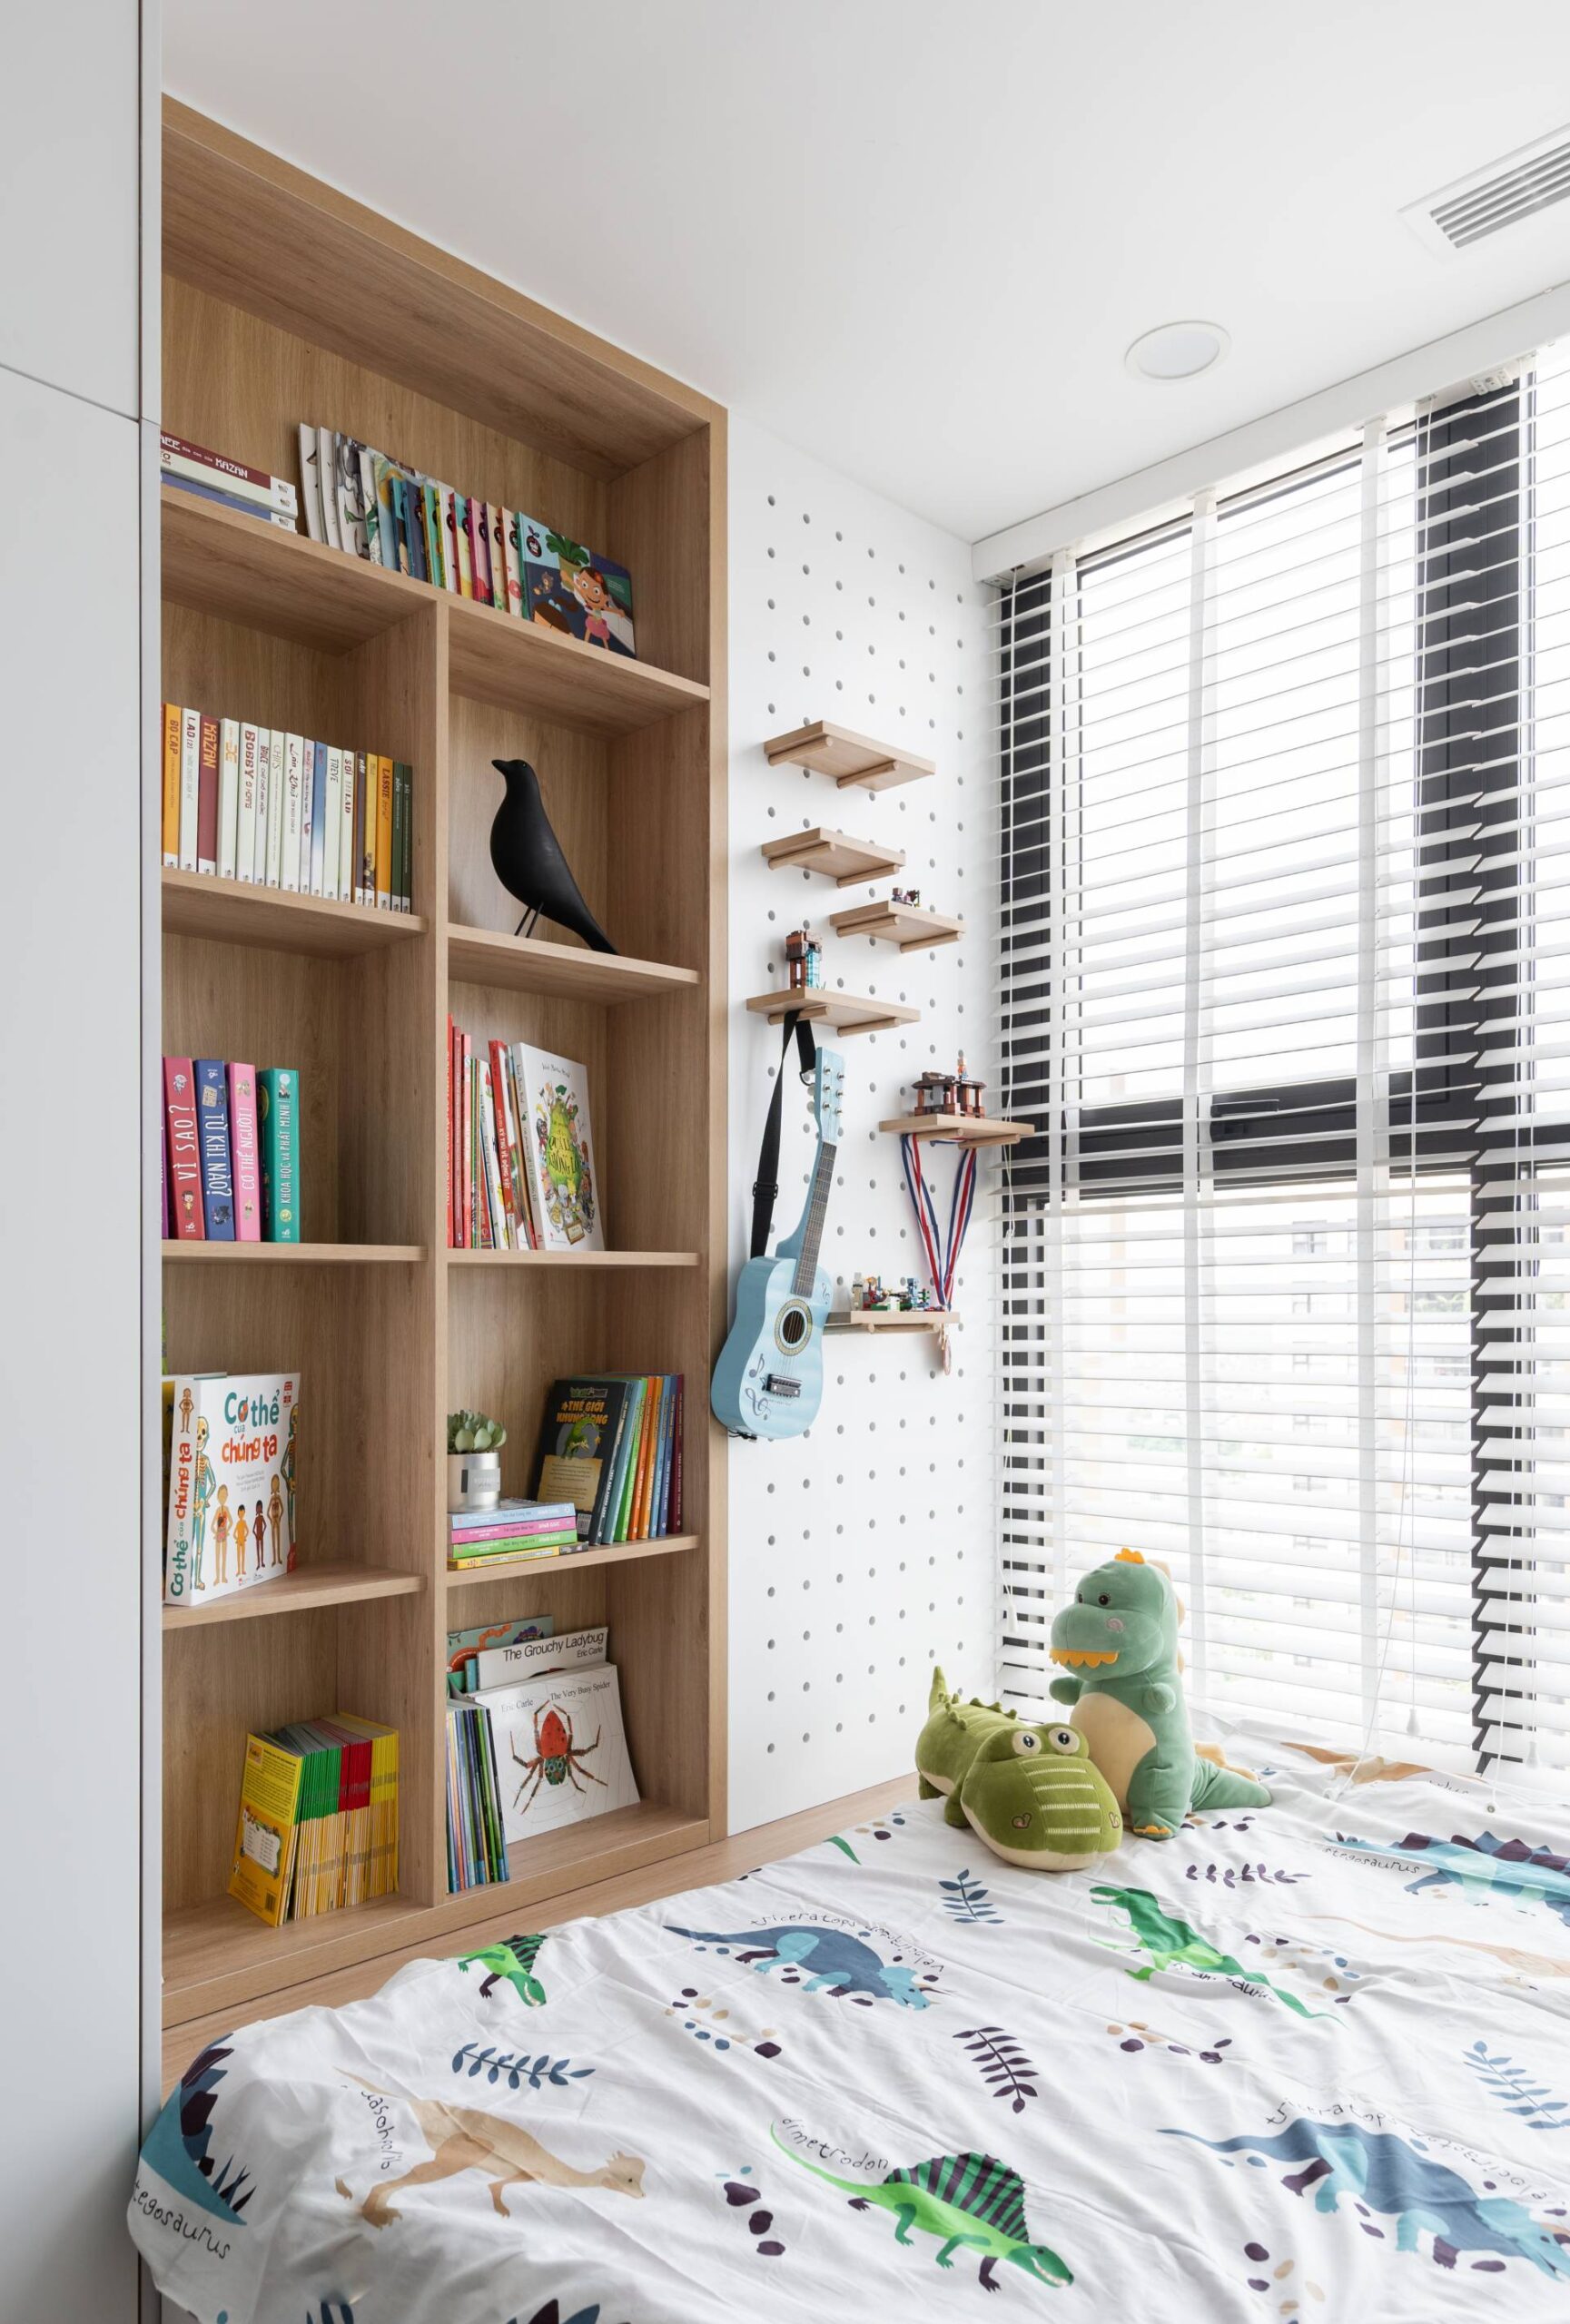 A perforated wall in the baby's bedroom is also an interesting highlight, helping to change and create many ways to hang things according to the baby's wants.